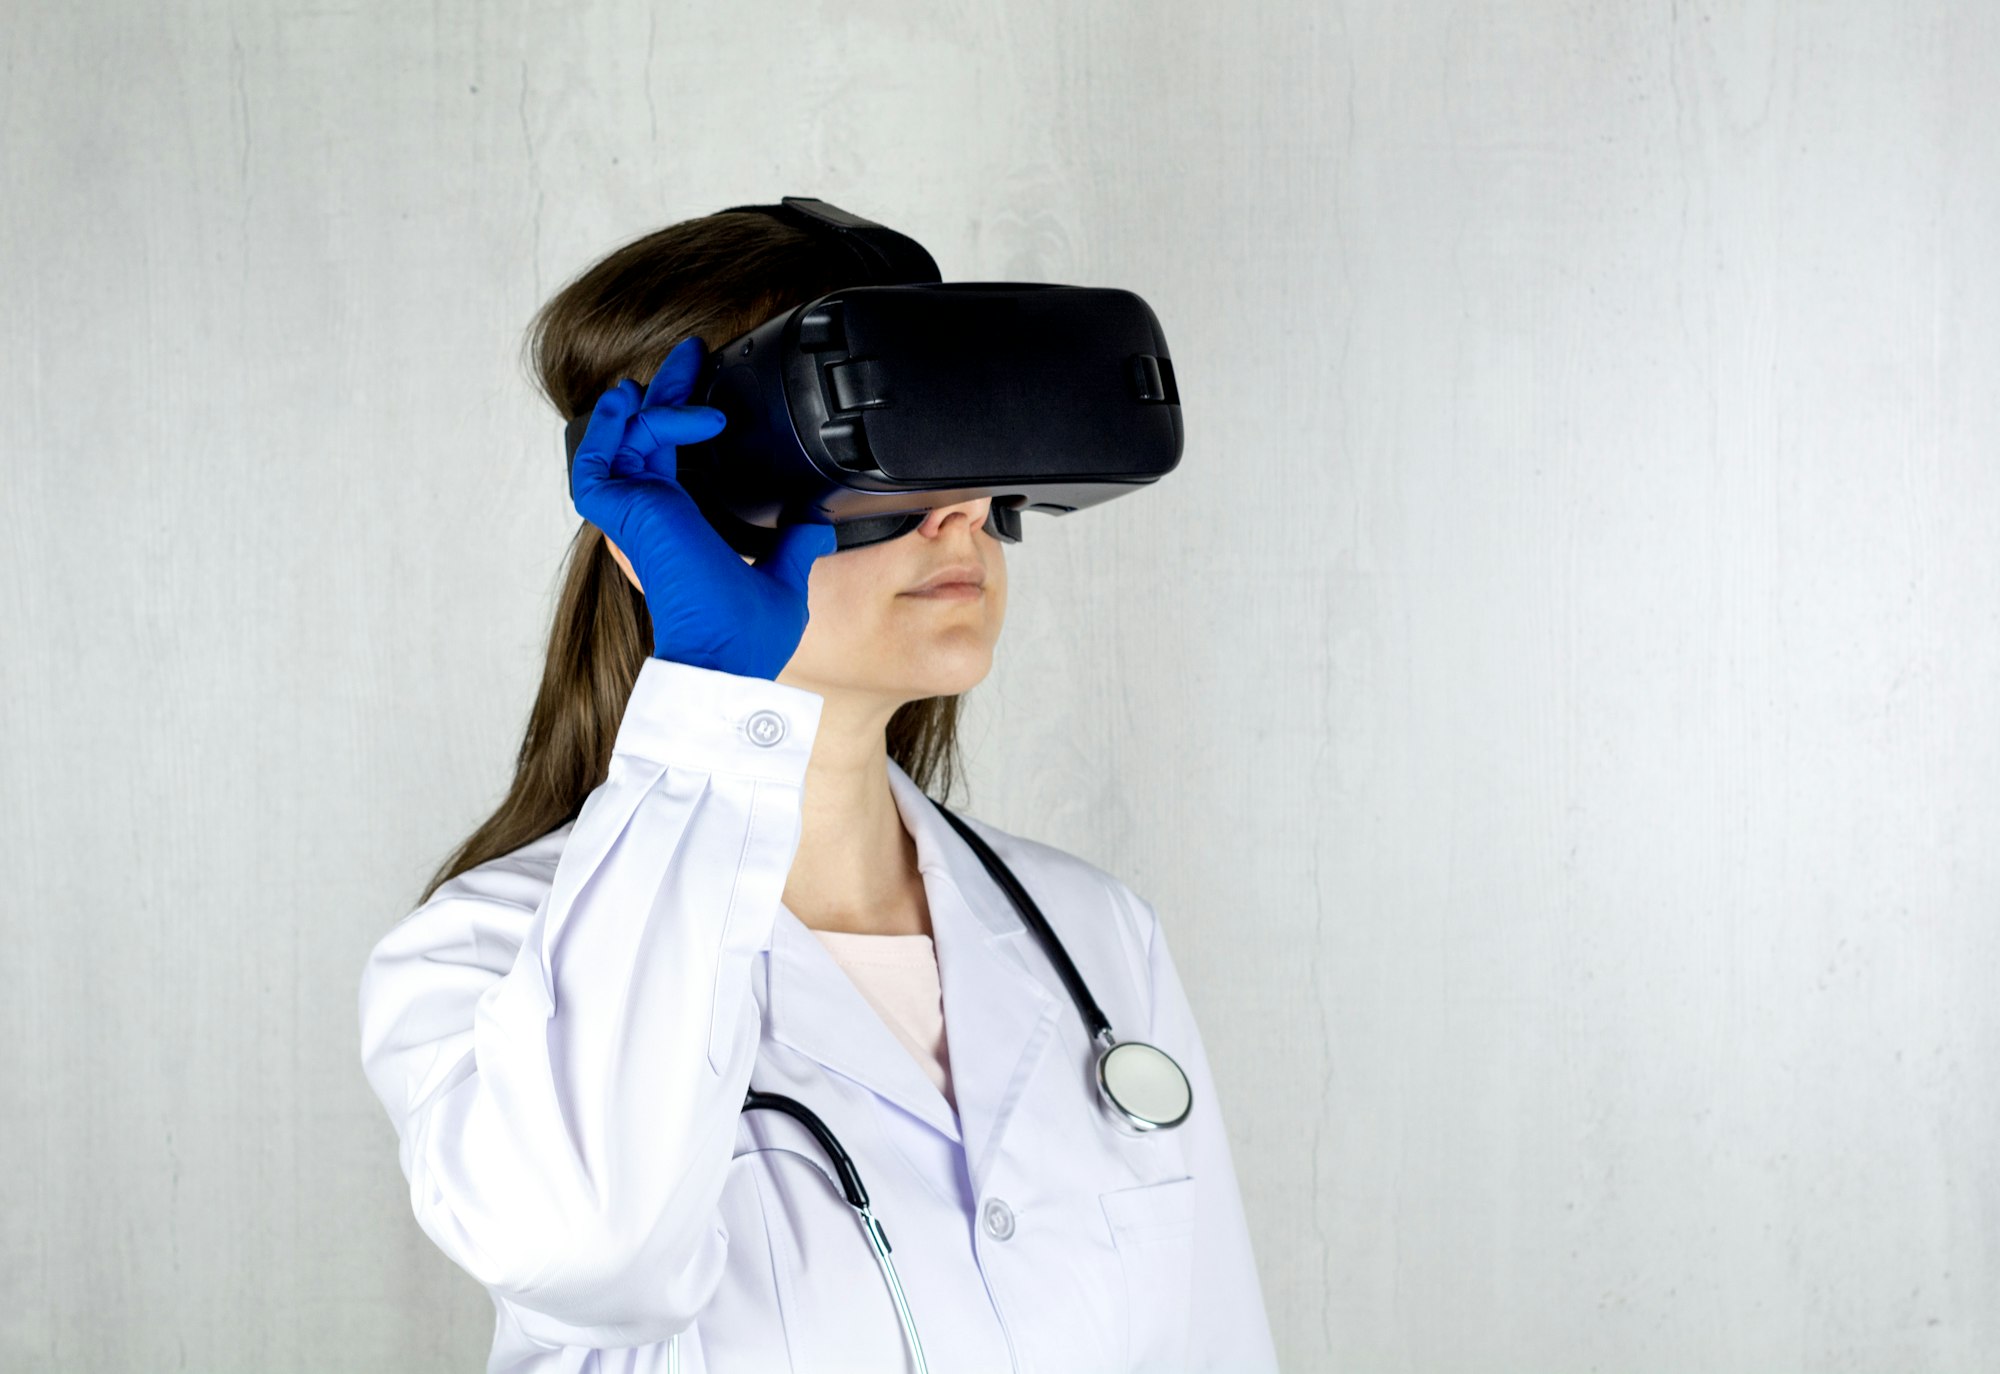 5 Ways Medical Virtual Reality Is Already Changing Healthcare